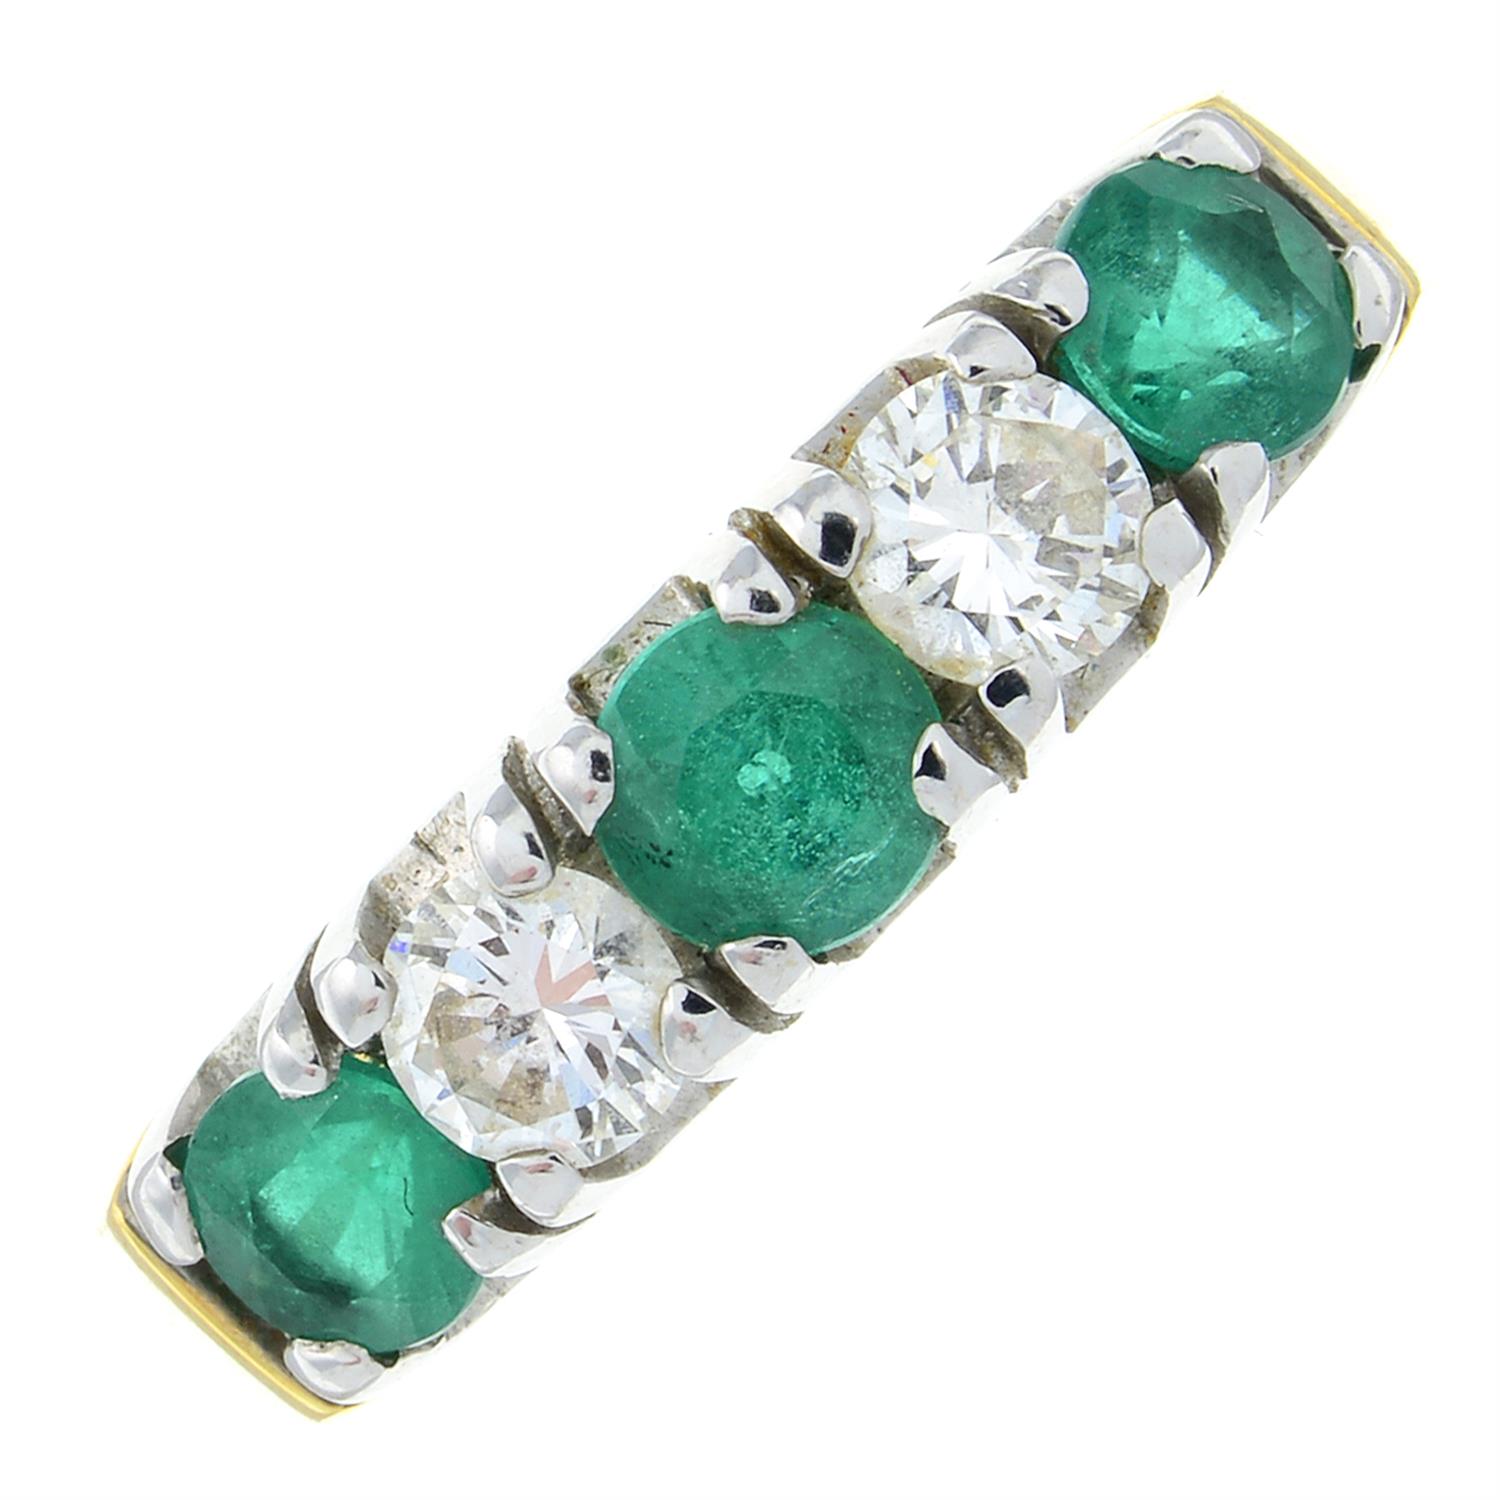 An 18ct gold brilliant-cut diamond and emerald five-stone ring.